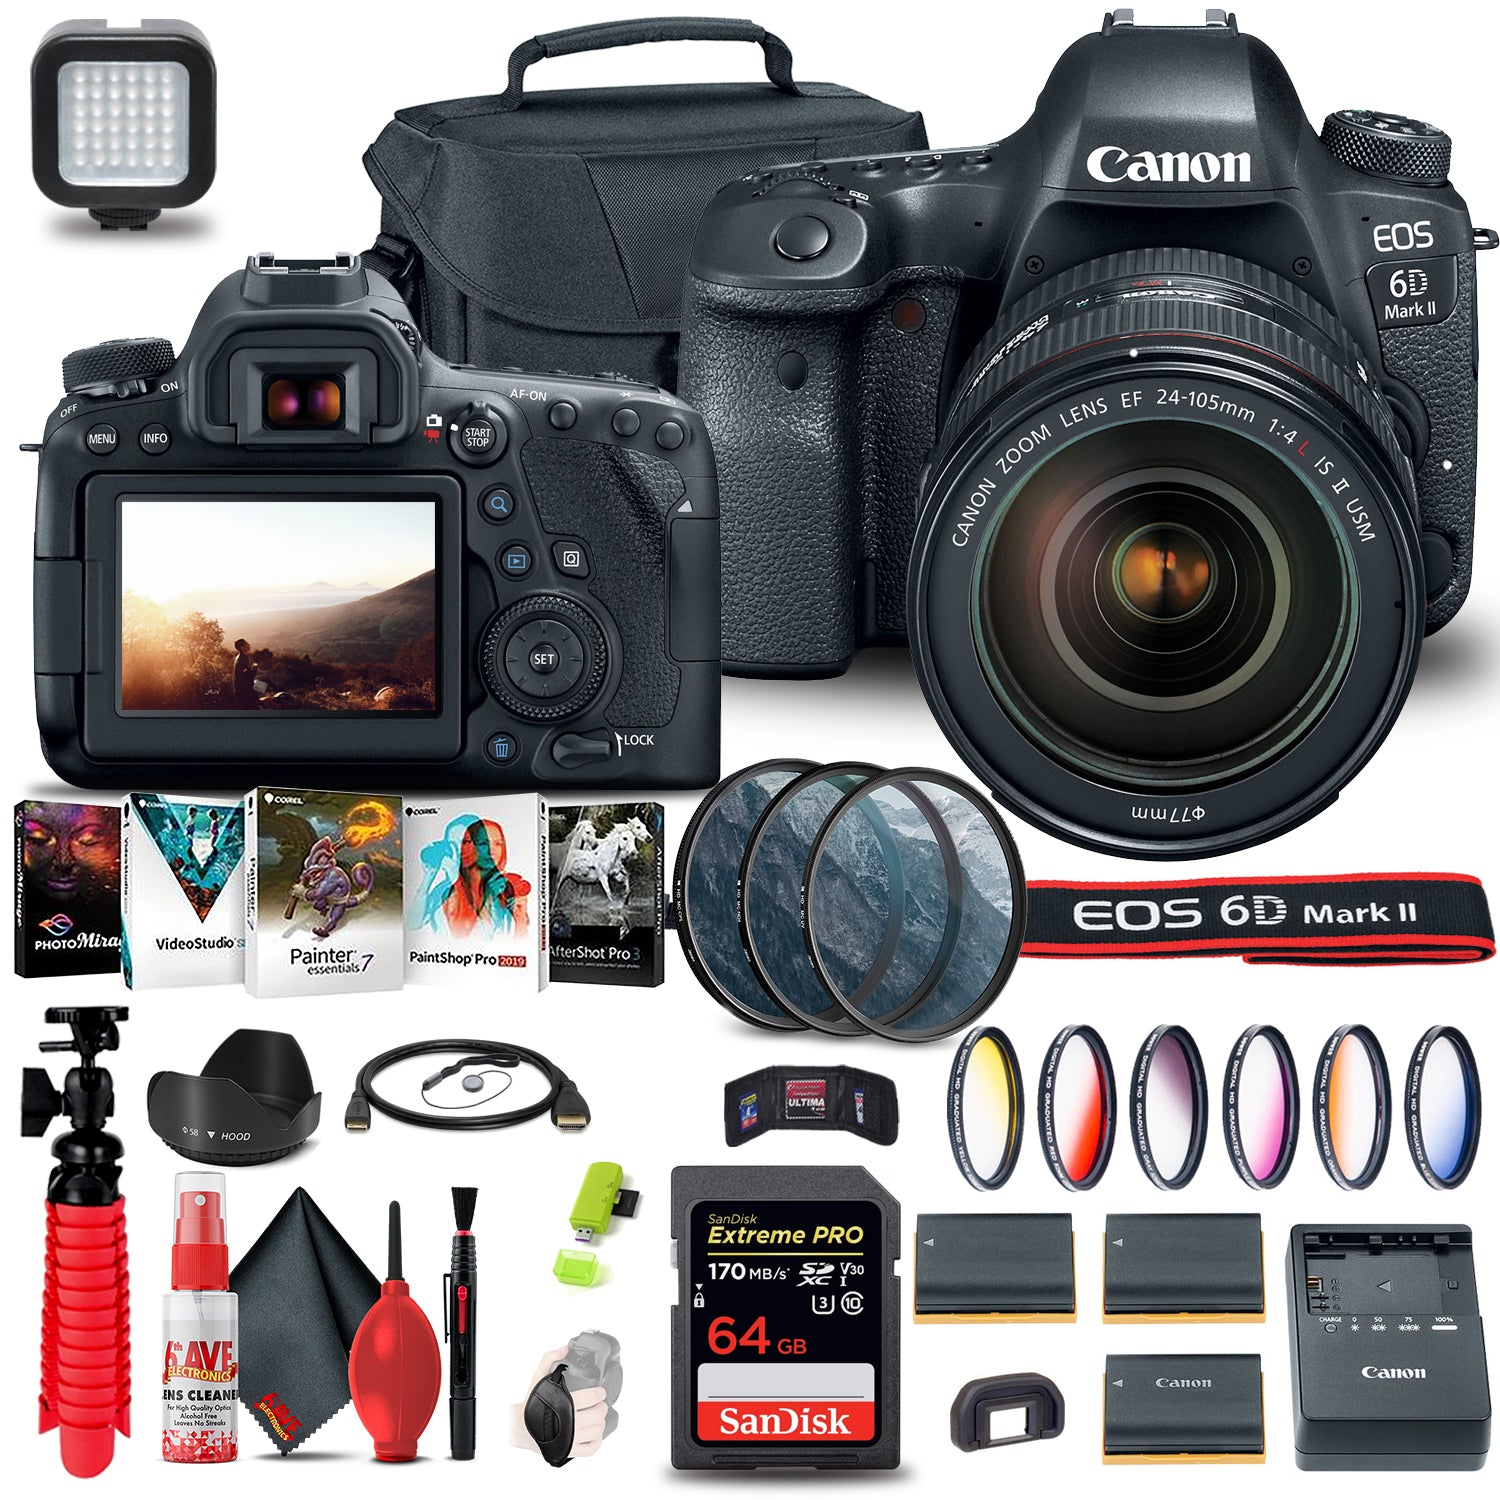 Canon EOS 6D Mark II Camera with 24-105mm f/4L II Lens (1897C009) Extreme Mountain Bundle